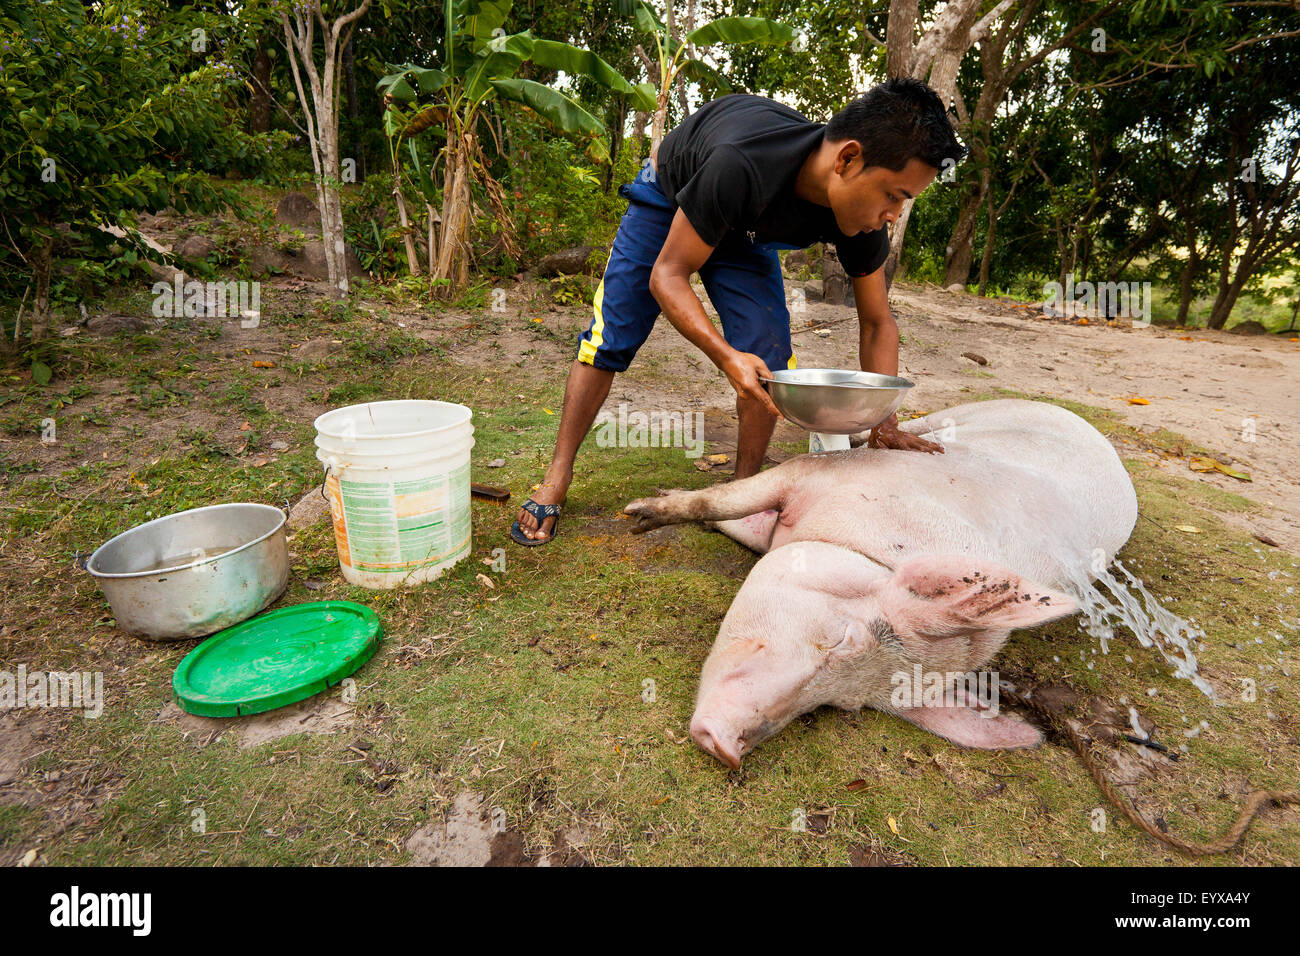 A boy is washing one of the family's pigs on their small farm in the interior of the Coclé province, Republic of Panama, Central America. The pig seems to enjoy being washed and massaged. Stock Photo